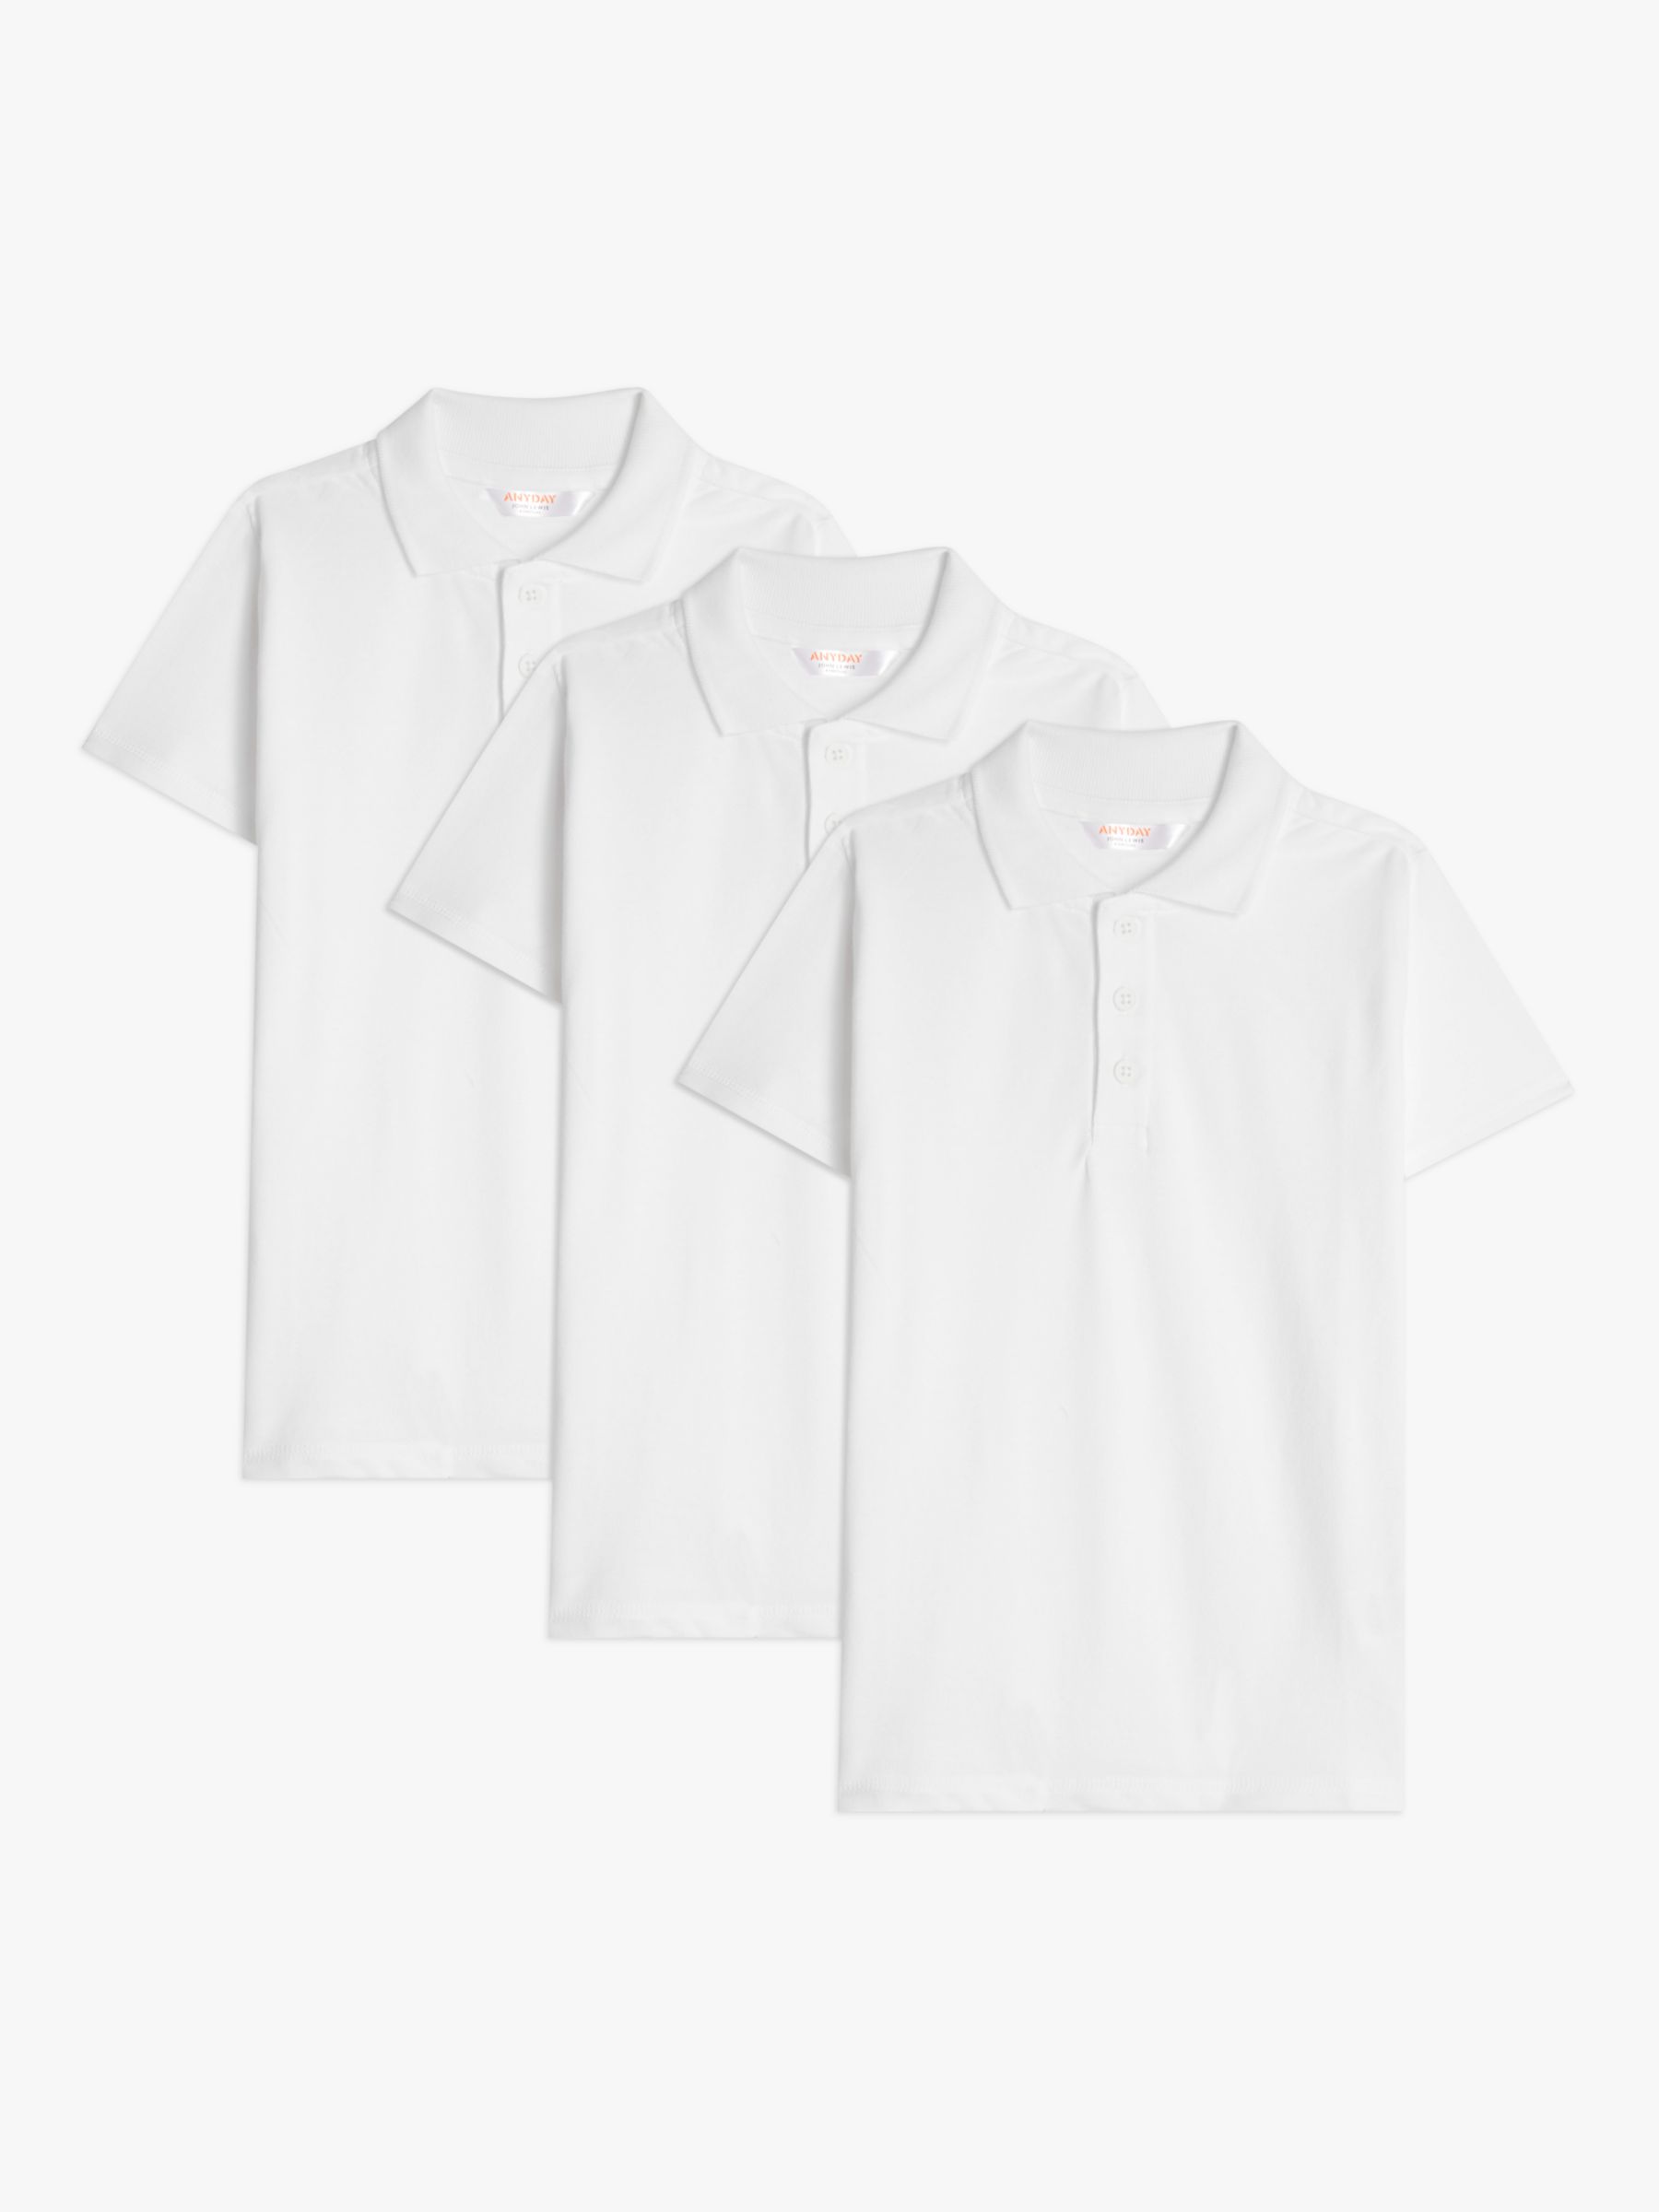 John Lewis ANYDAY Pure Cotton Polo Shirt, Pack of 3, White, 3 years